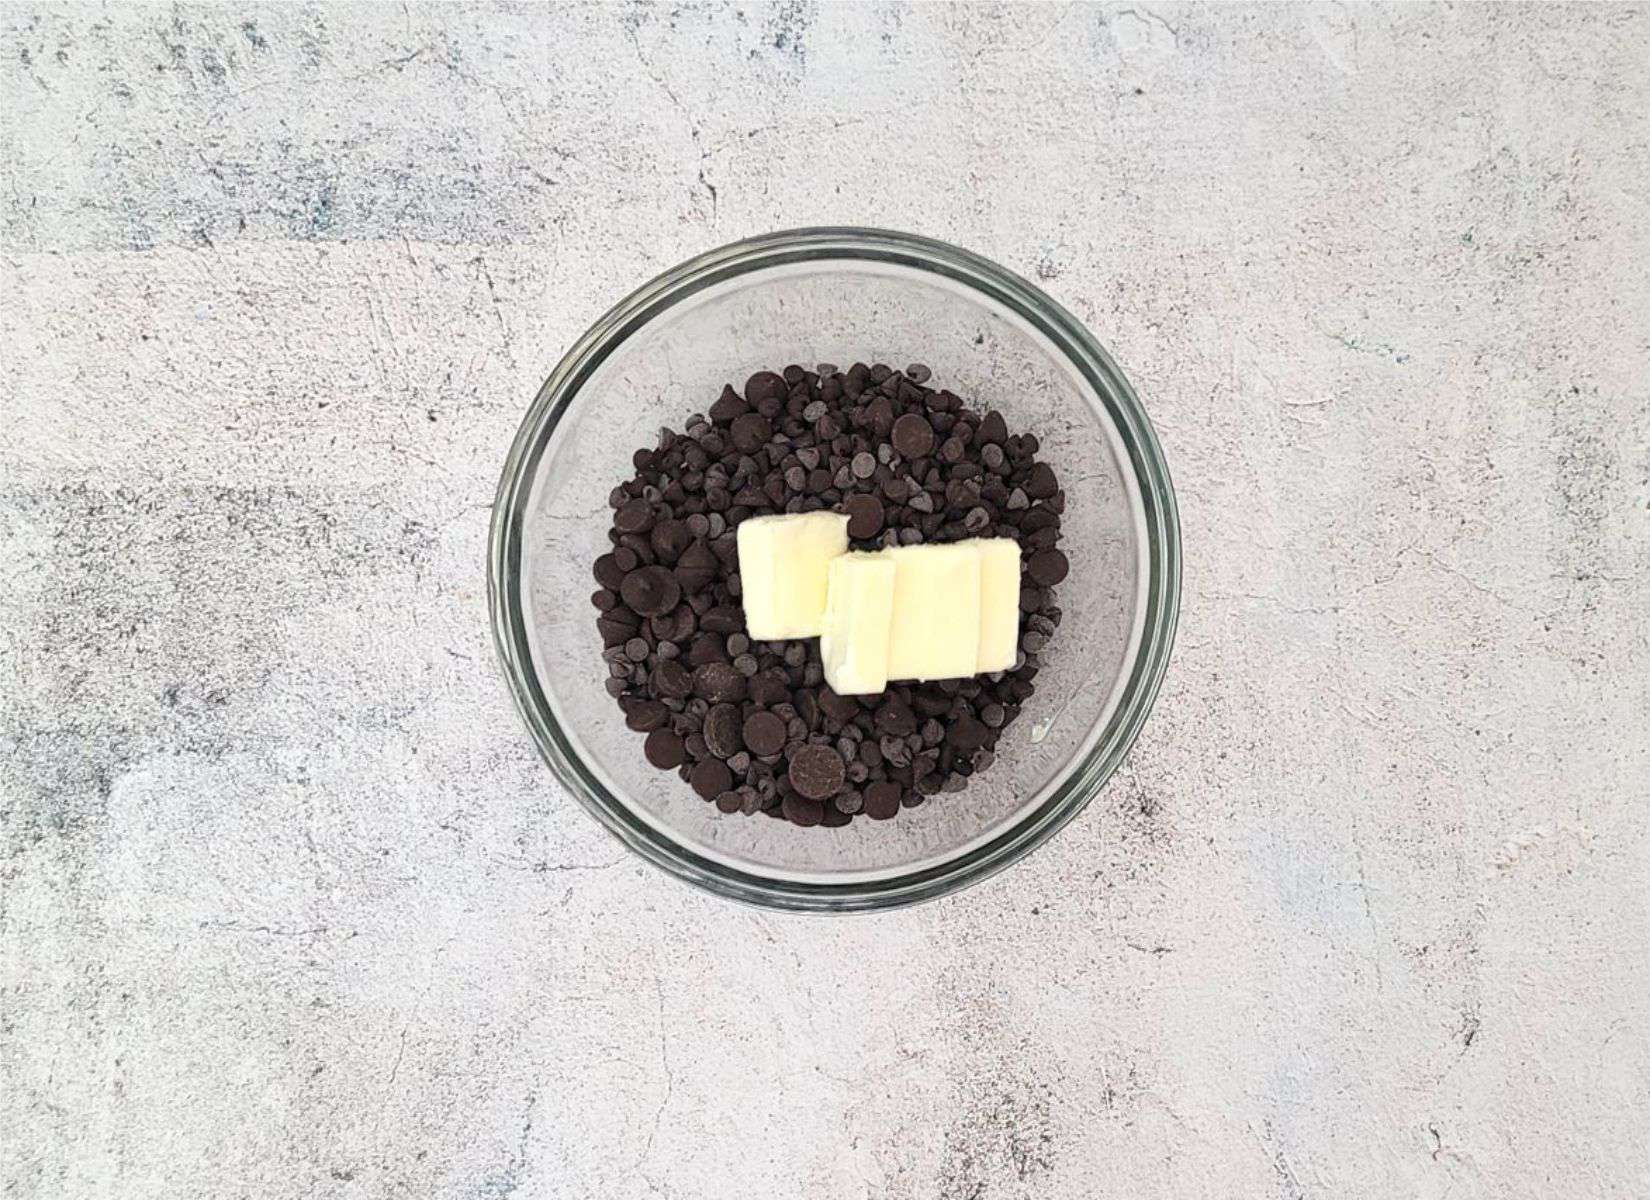 butter and chocolate chips in a glass bowl